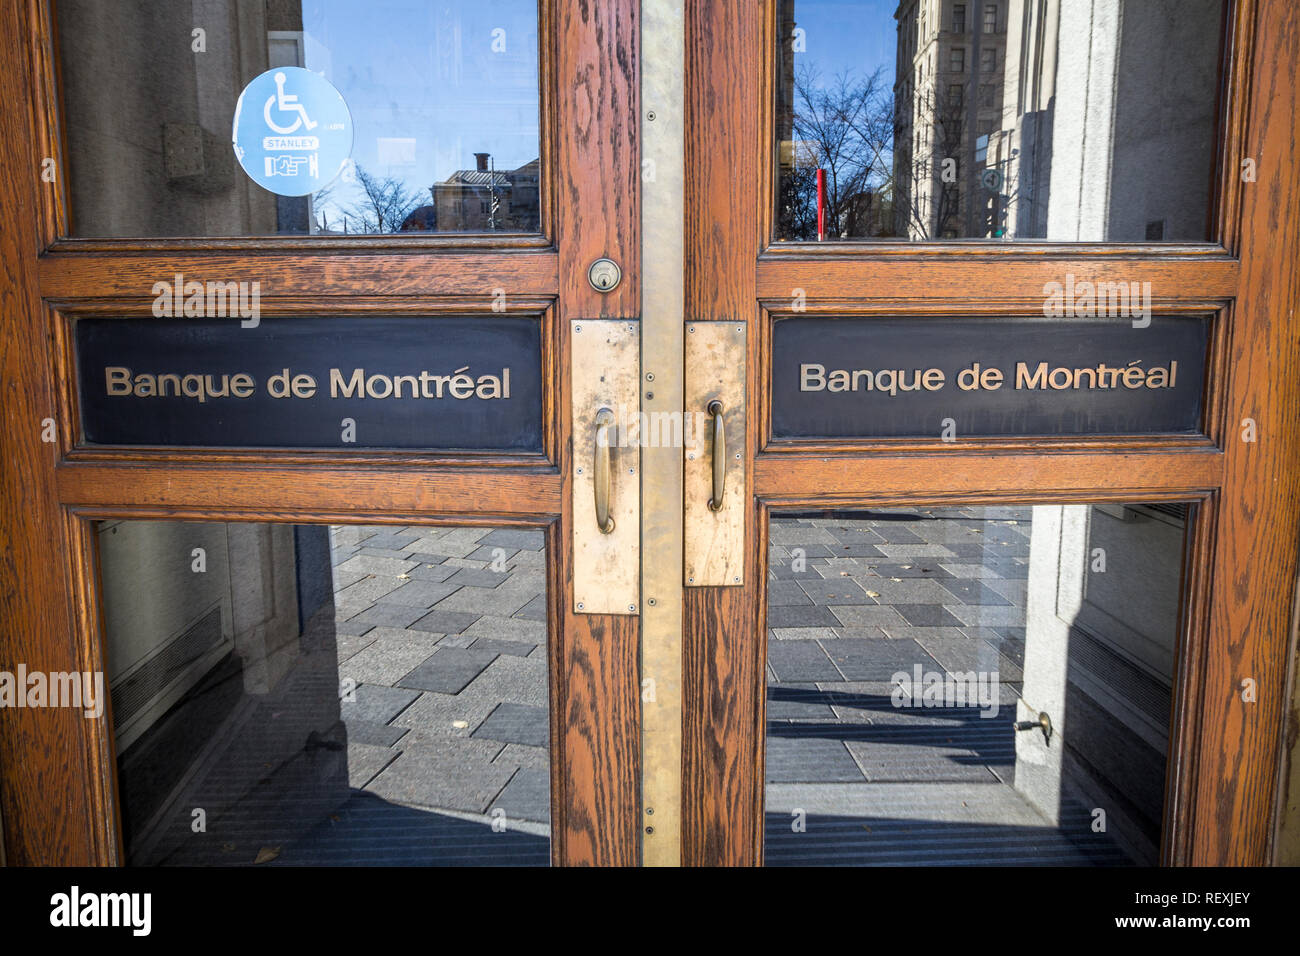 MONTREAL, CANADA - NOVEMBER 4, 2018: Bank of Montreal logo, known as BMO, on the doors of their historical office in Old Montreal. Called banque de Mo Stock Photo